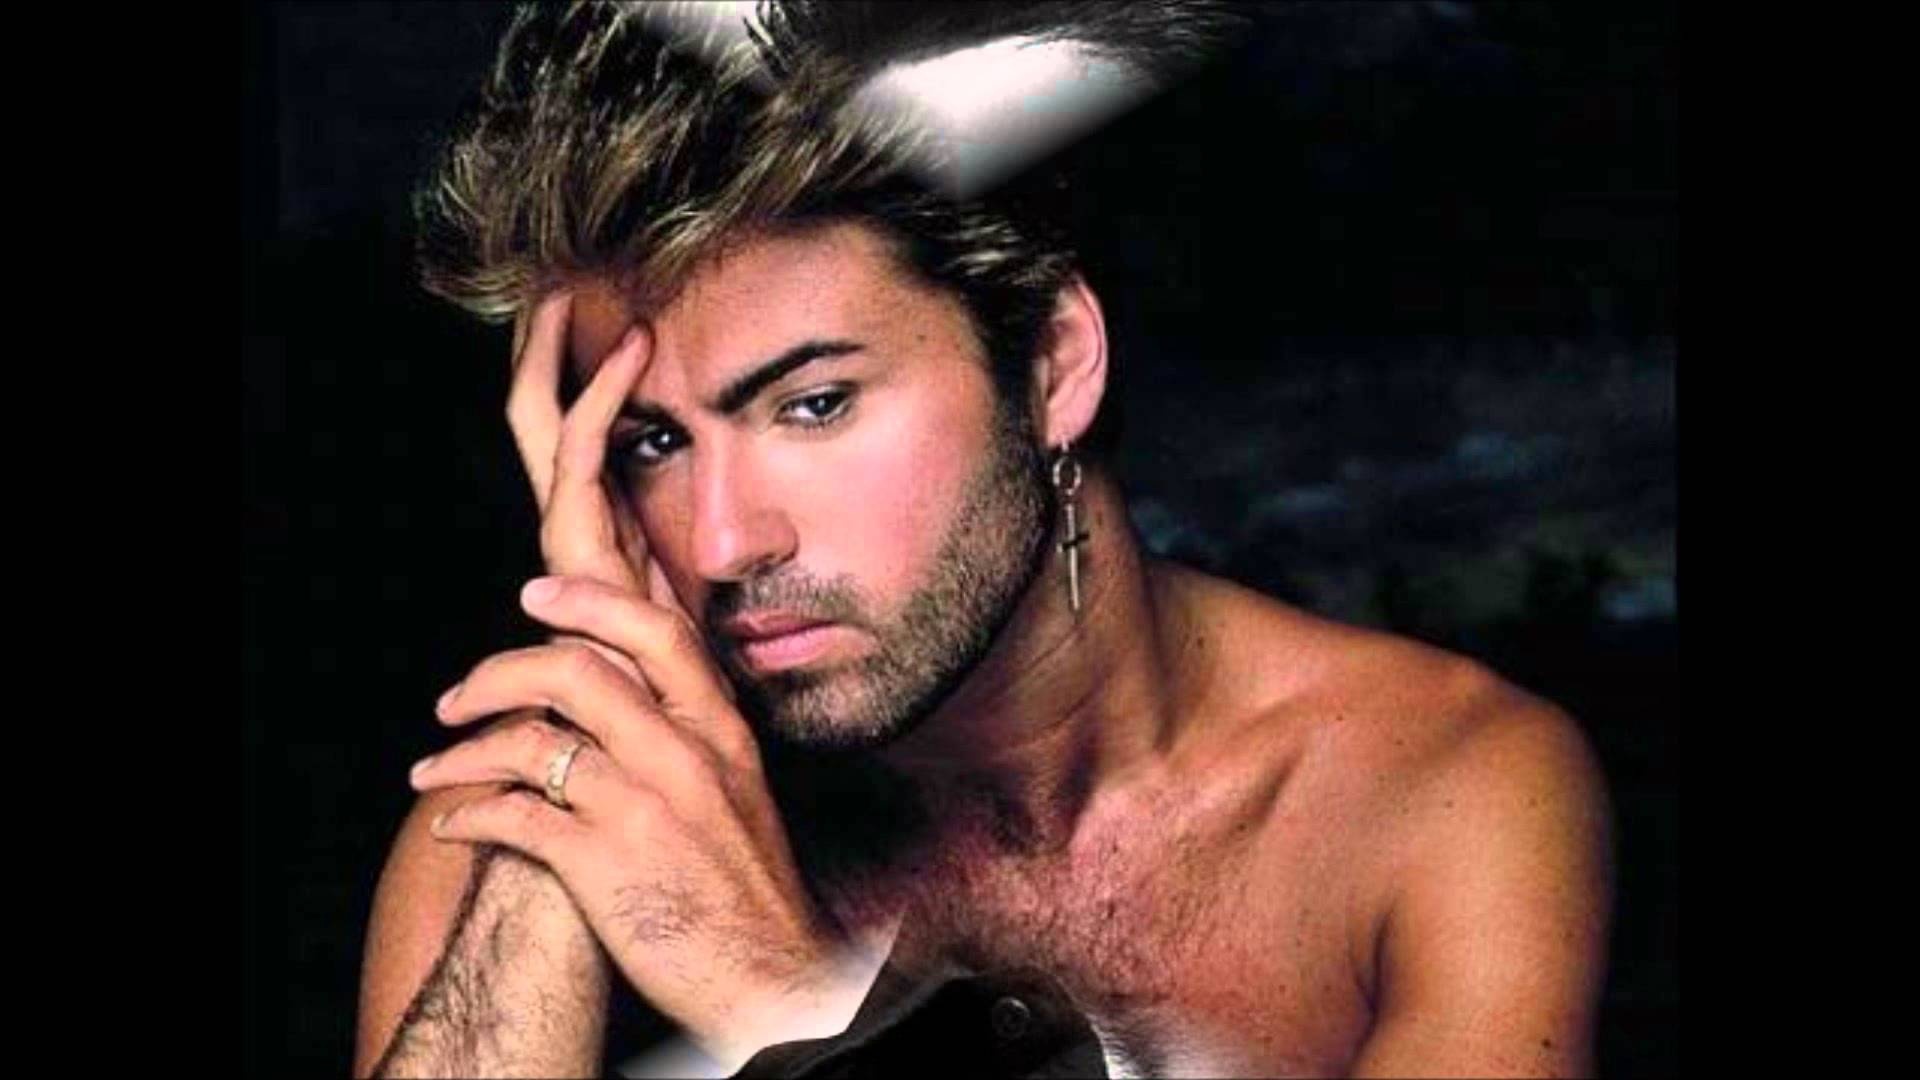 George Michael: Made a massive impact on the music industry since the release of his first album with his duo partner, Andrew Ridgeley. 1920x1080 Full HD Wallpaper.